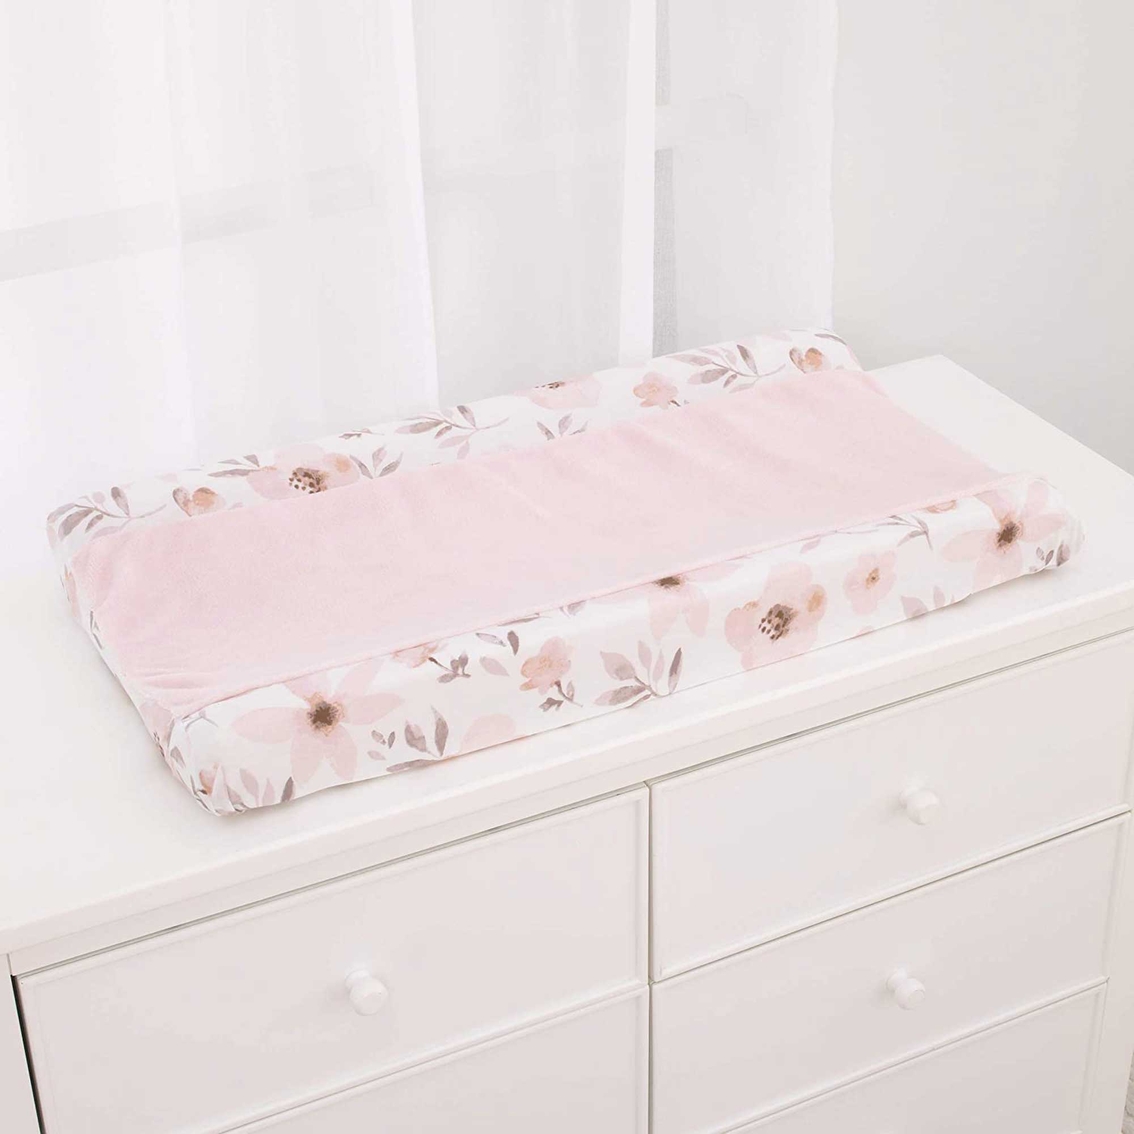 NoJo Countryside Floral Changing Pad Cover - Image 2 of 2